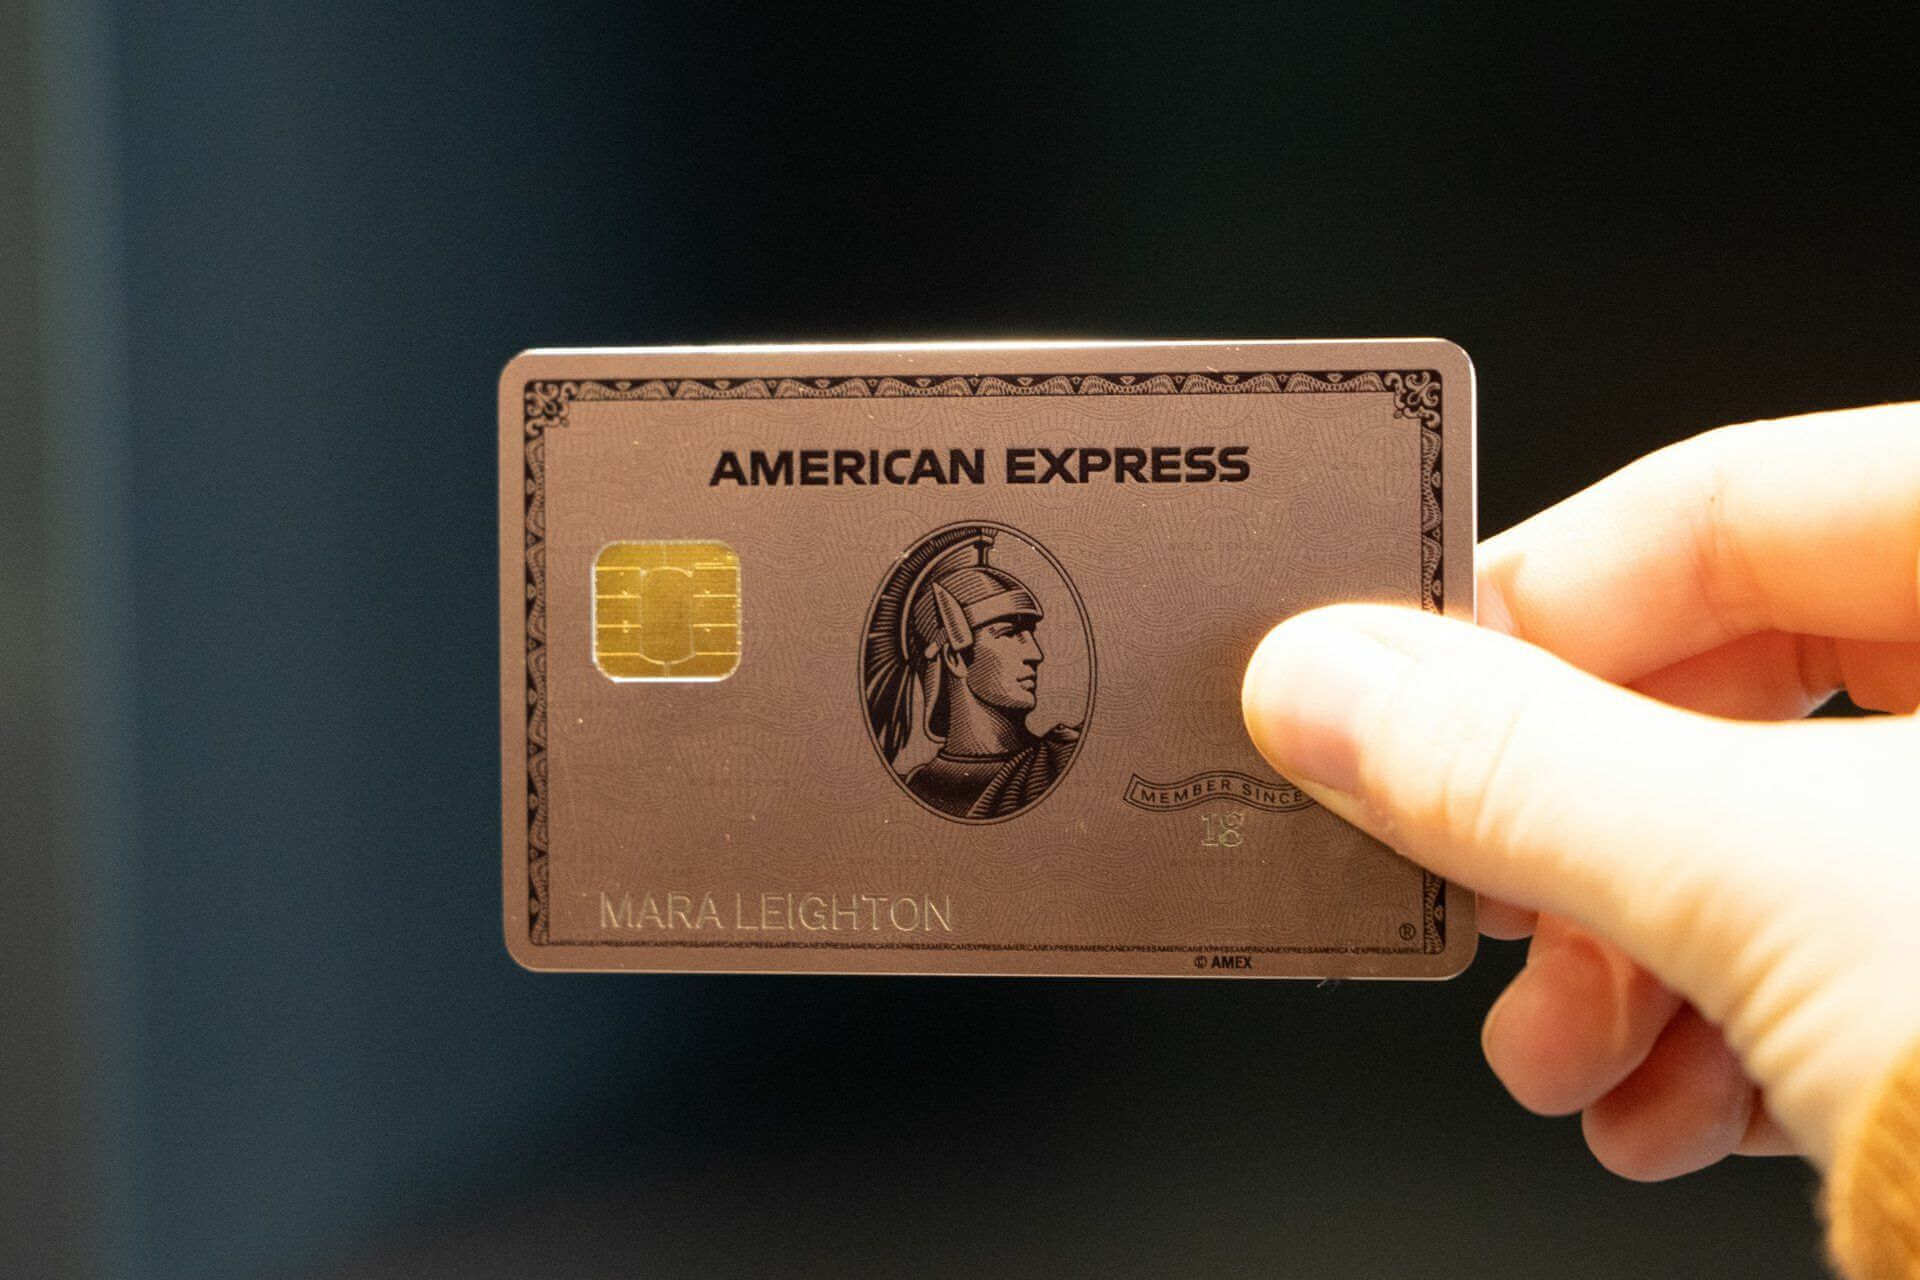 How can i confirm American Express card online